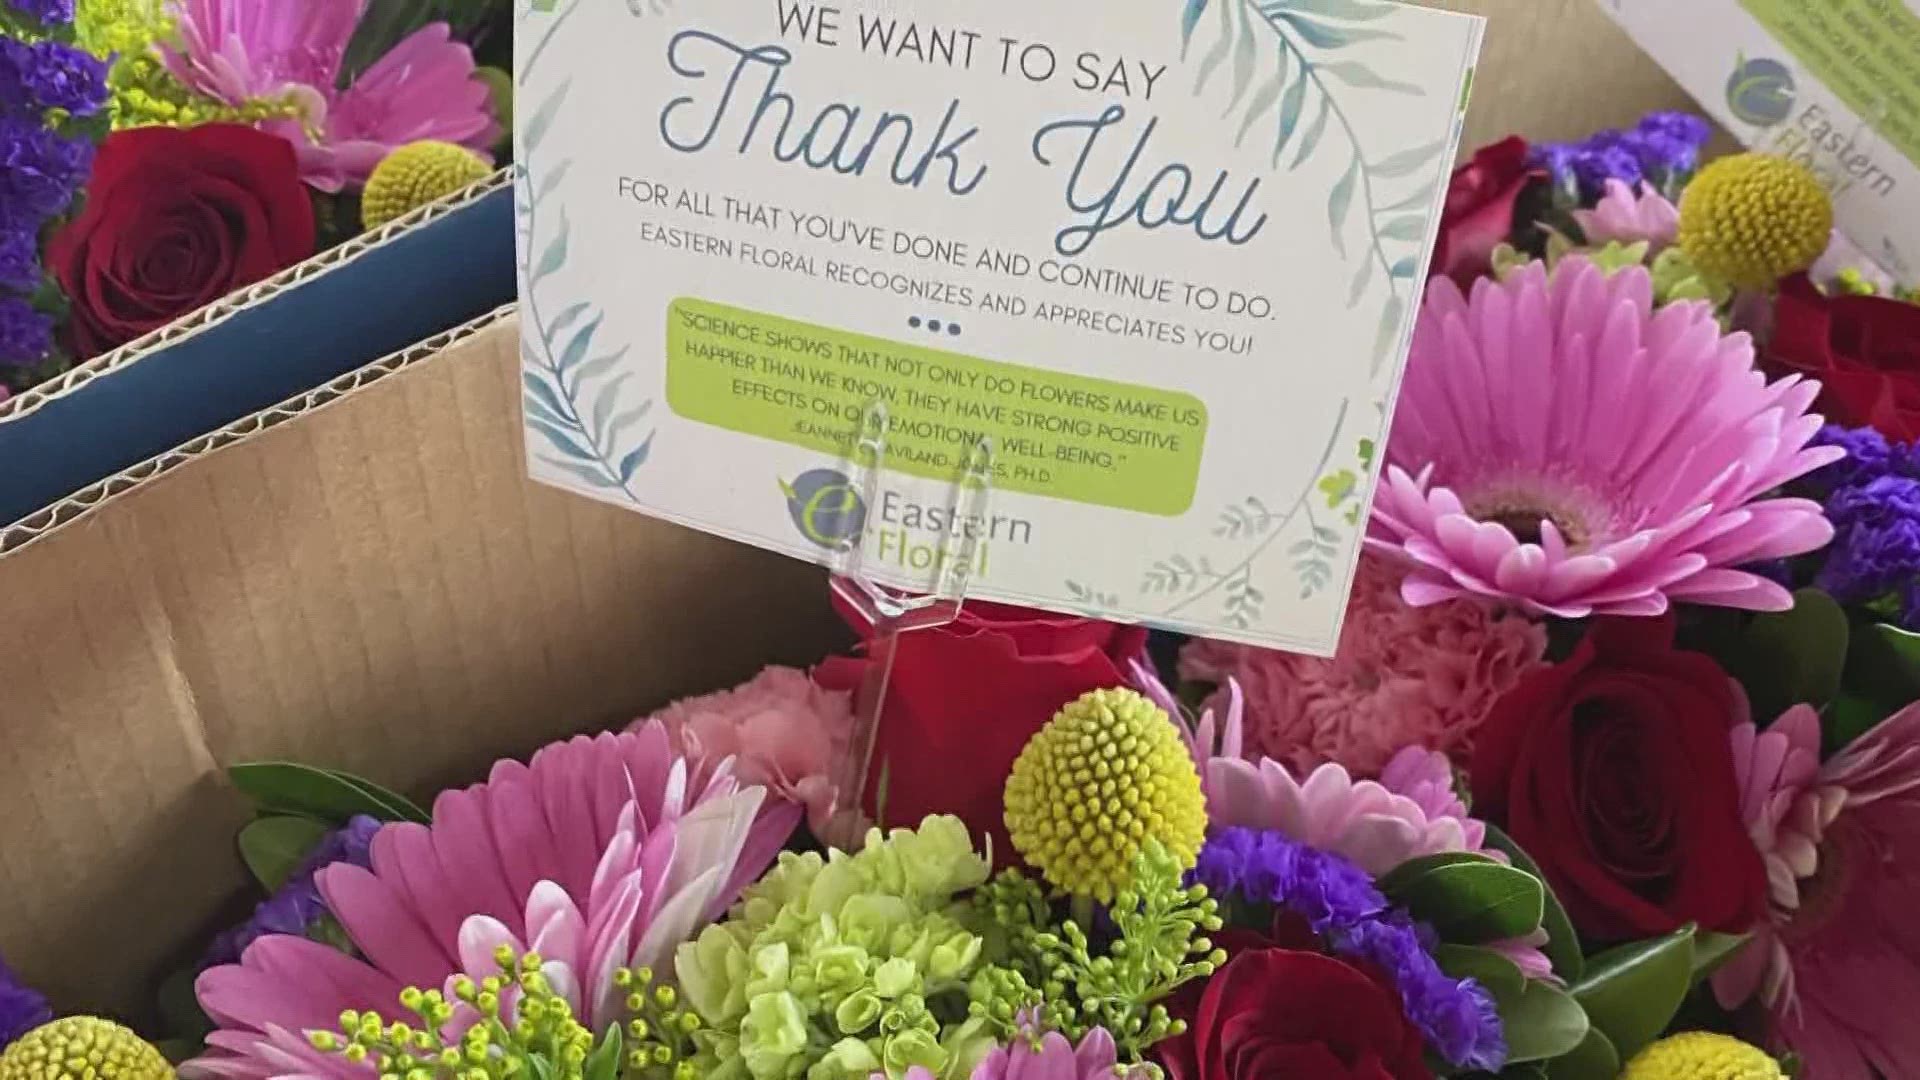 Eastern Floral has launched a campaign to deliver more than 150 floral arrangements to nurses and education professionals in West Michigan.